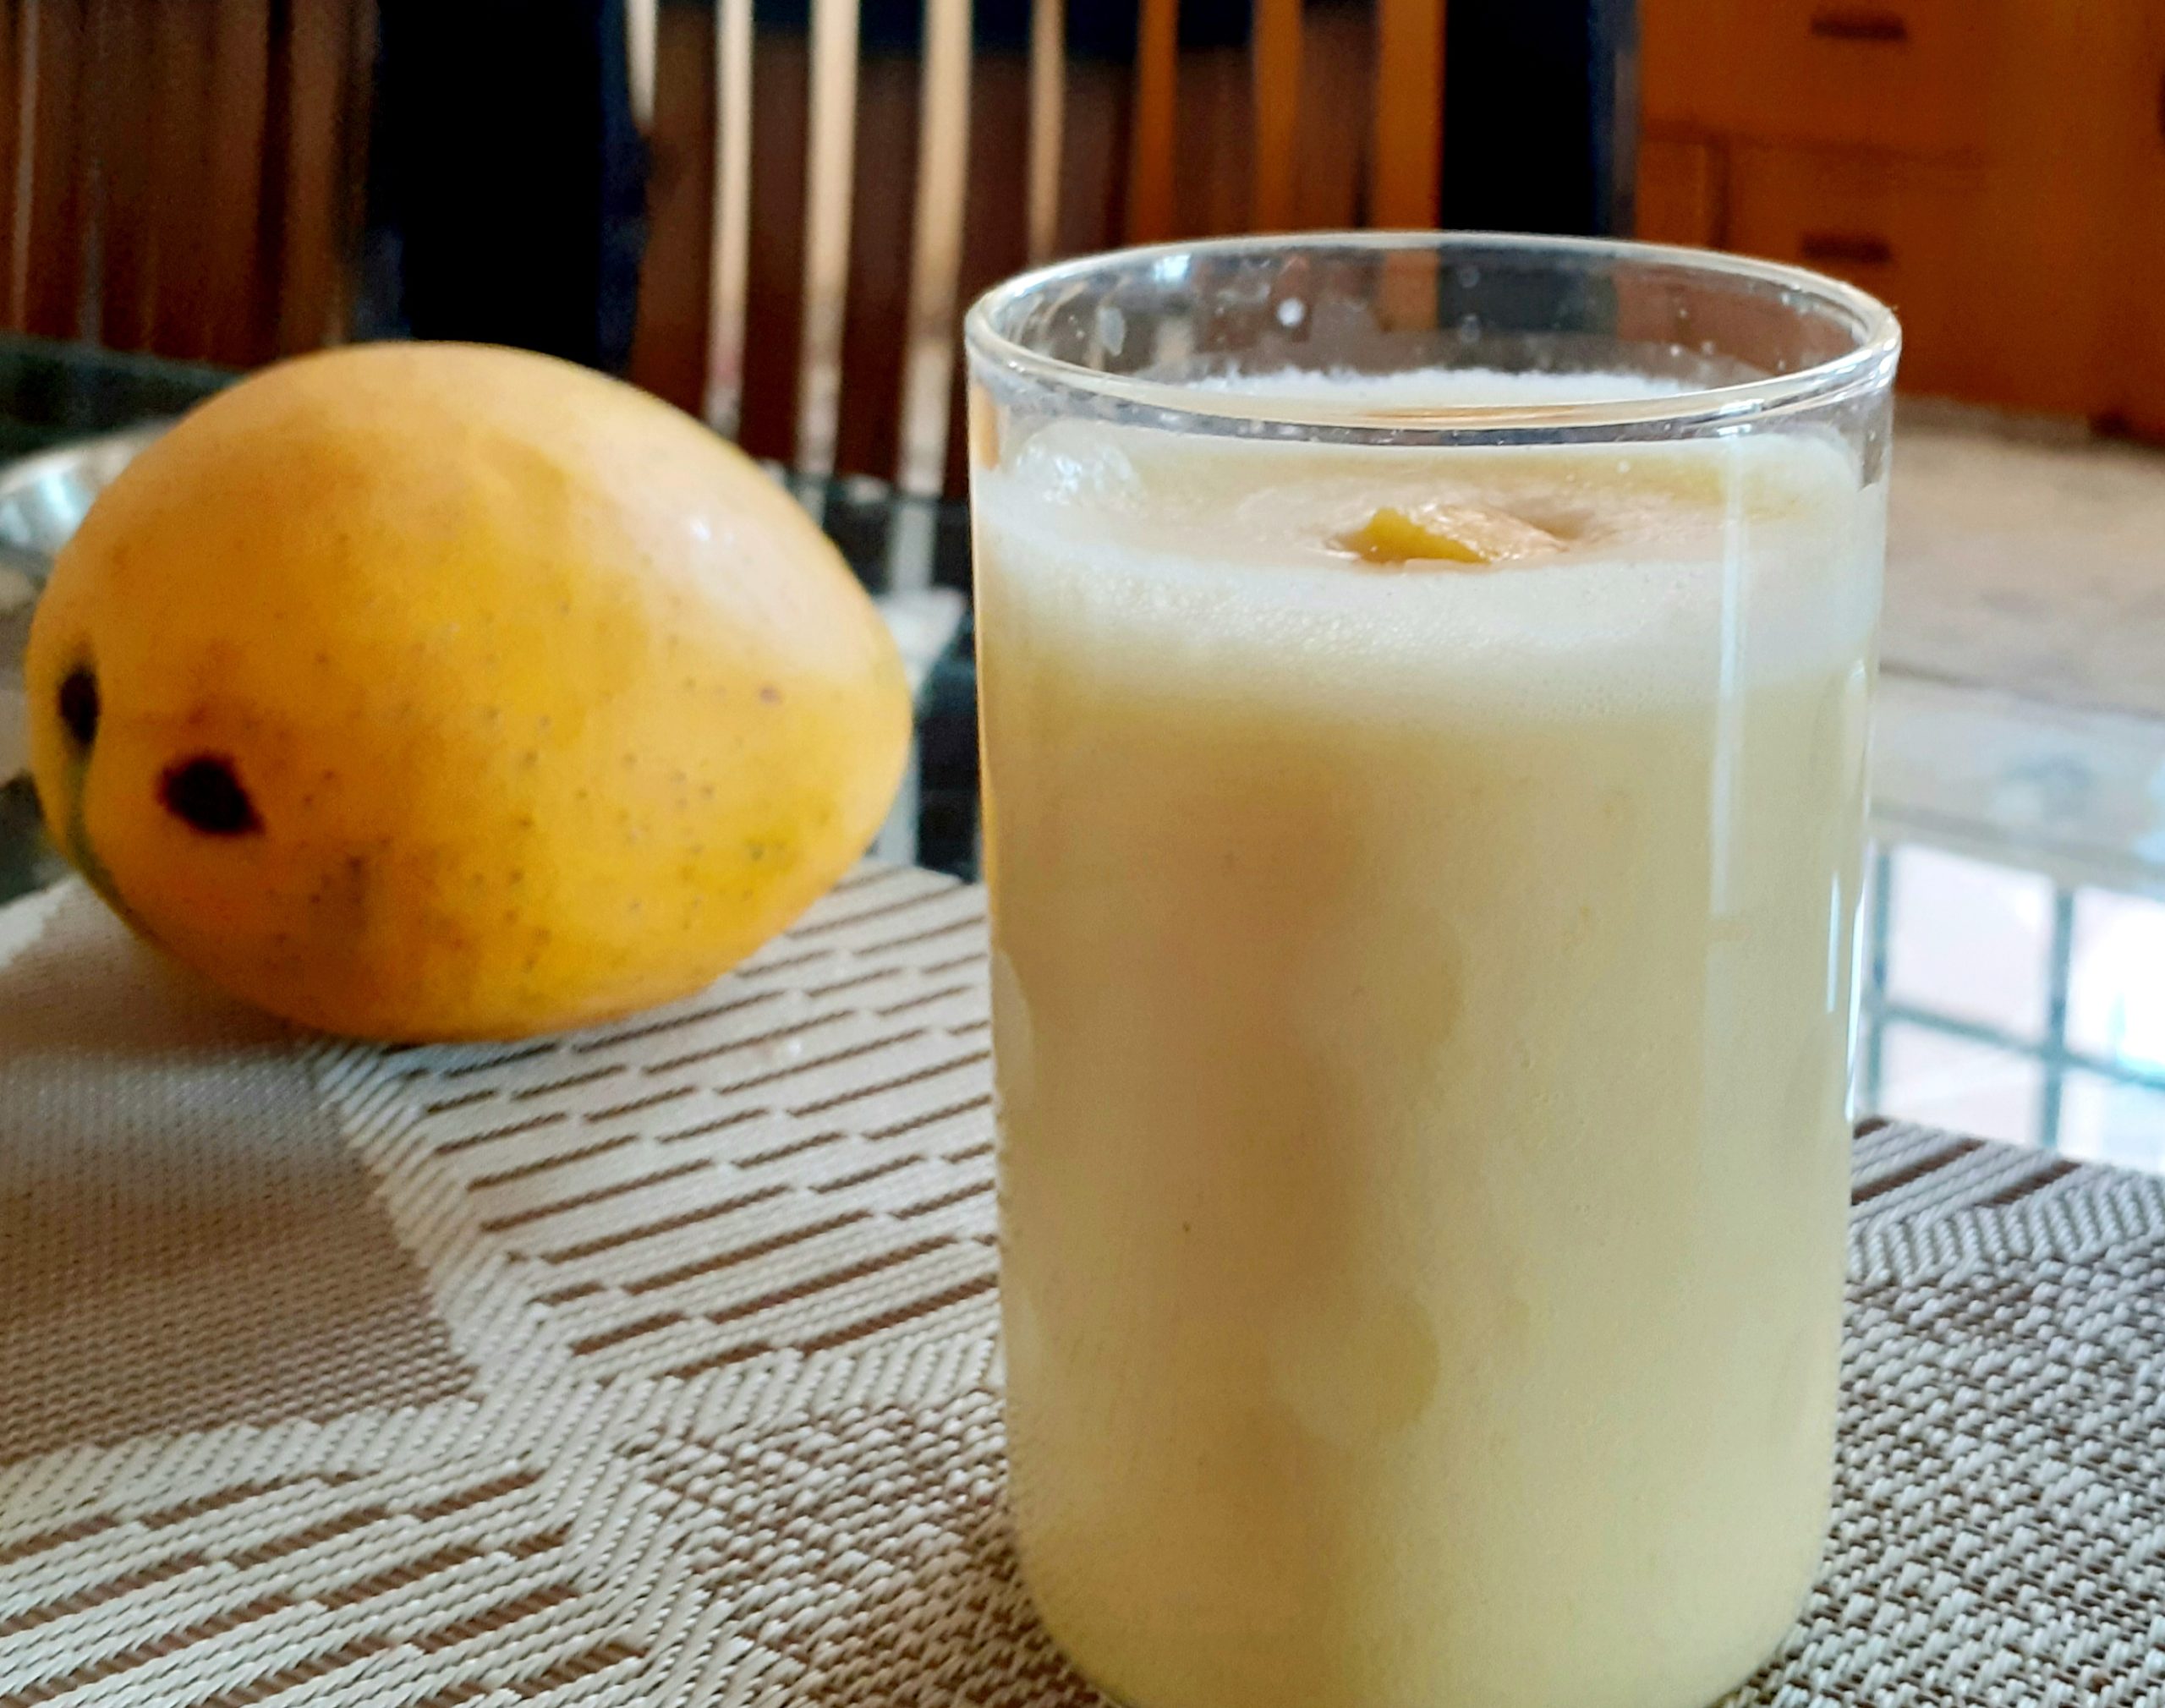 Mango Shake is an easy, delicious, Indian Summer fulfilling drink